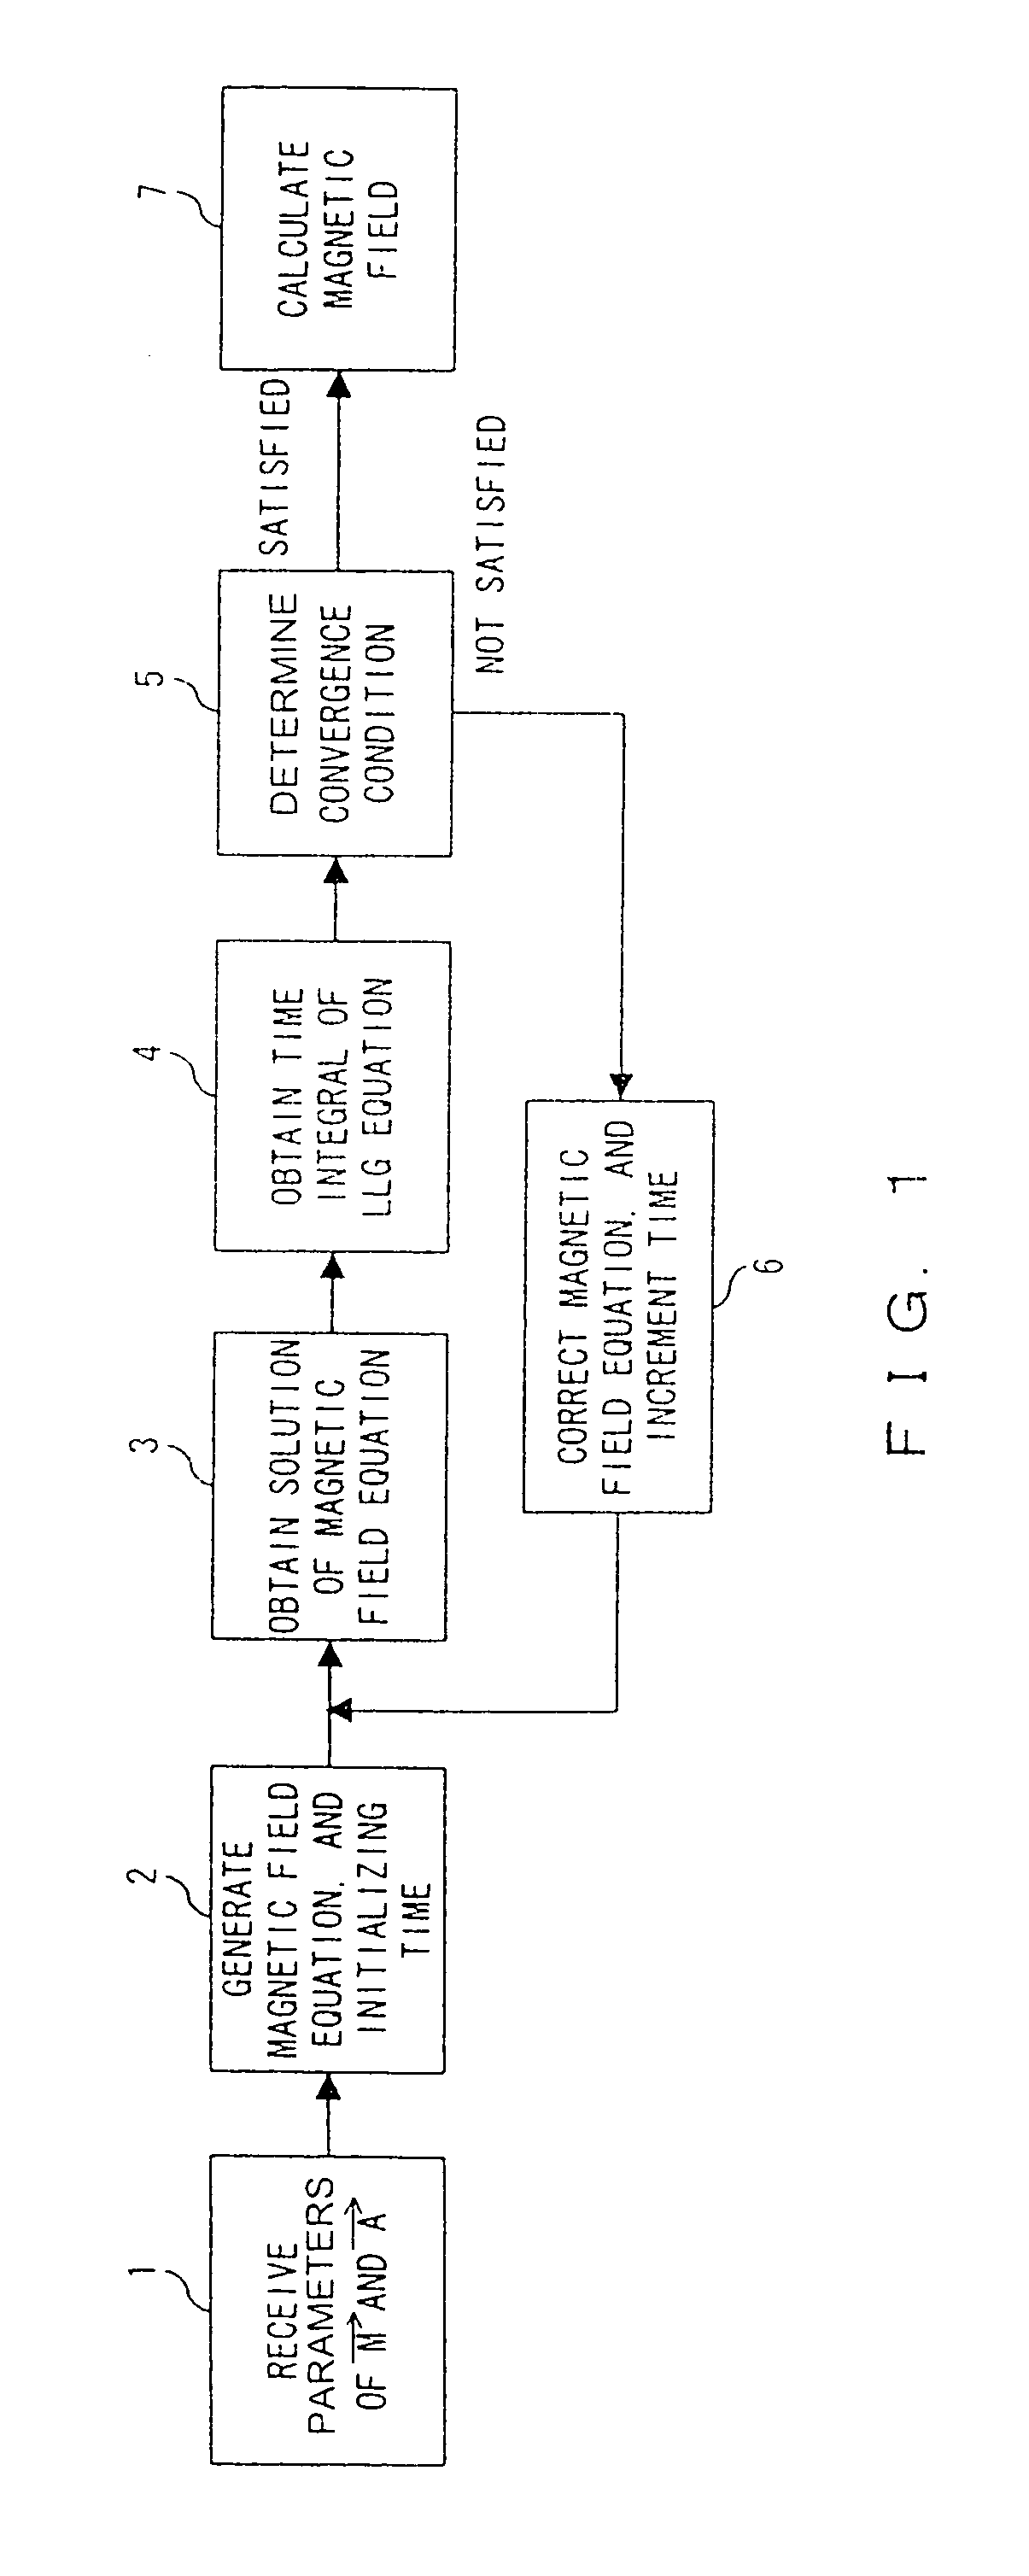 Micromagnetization analytical program and apparatus